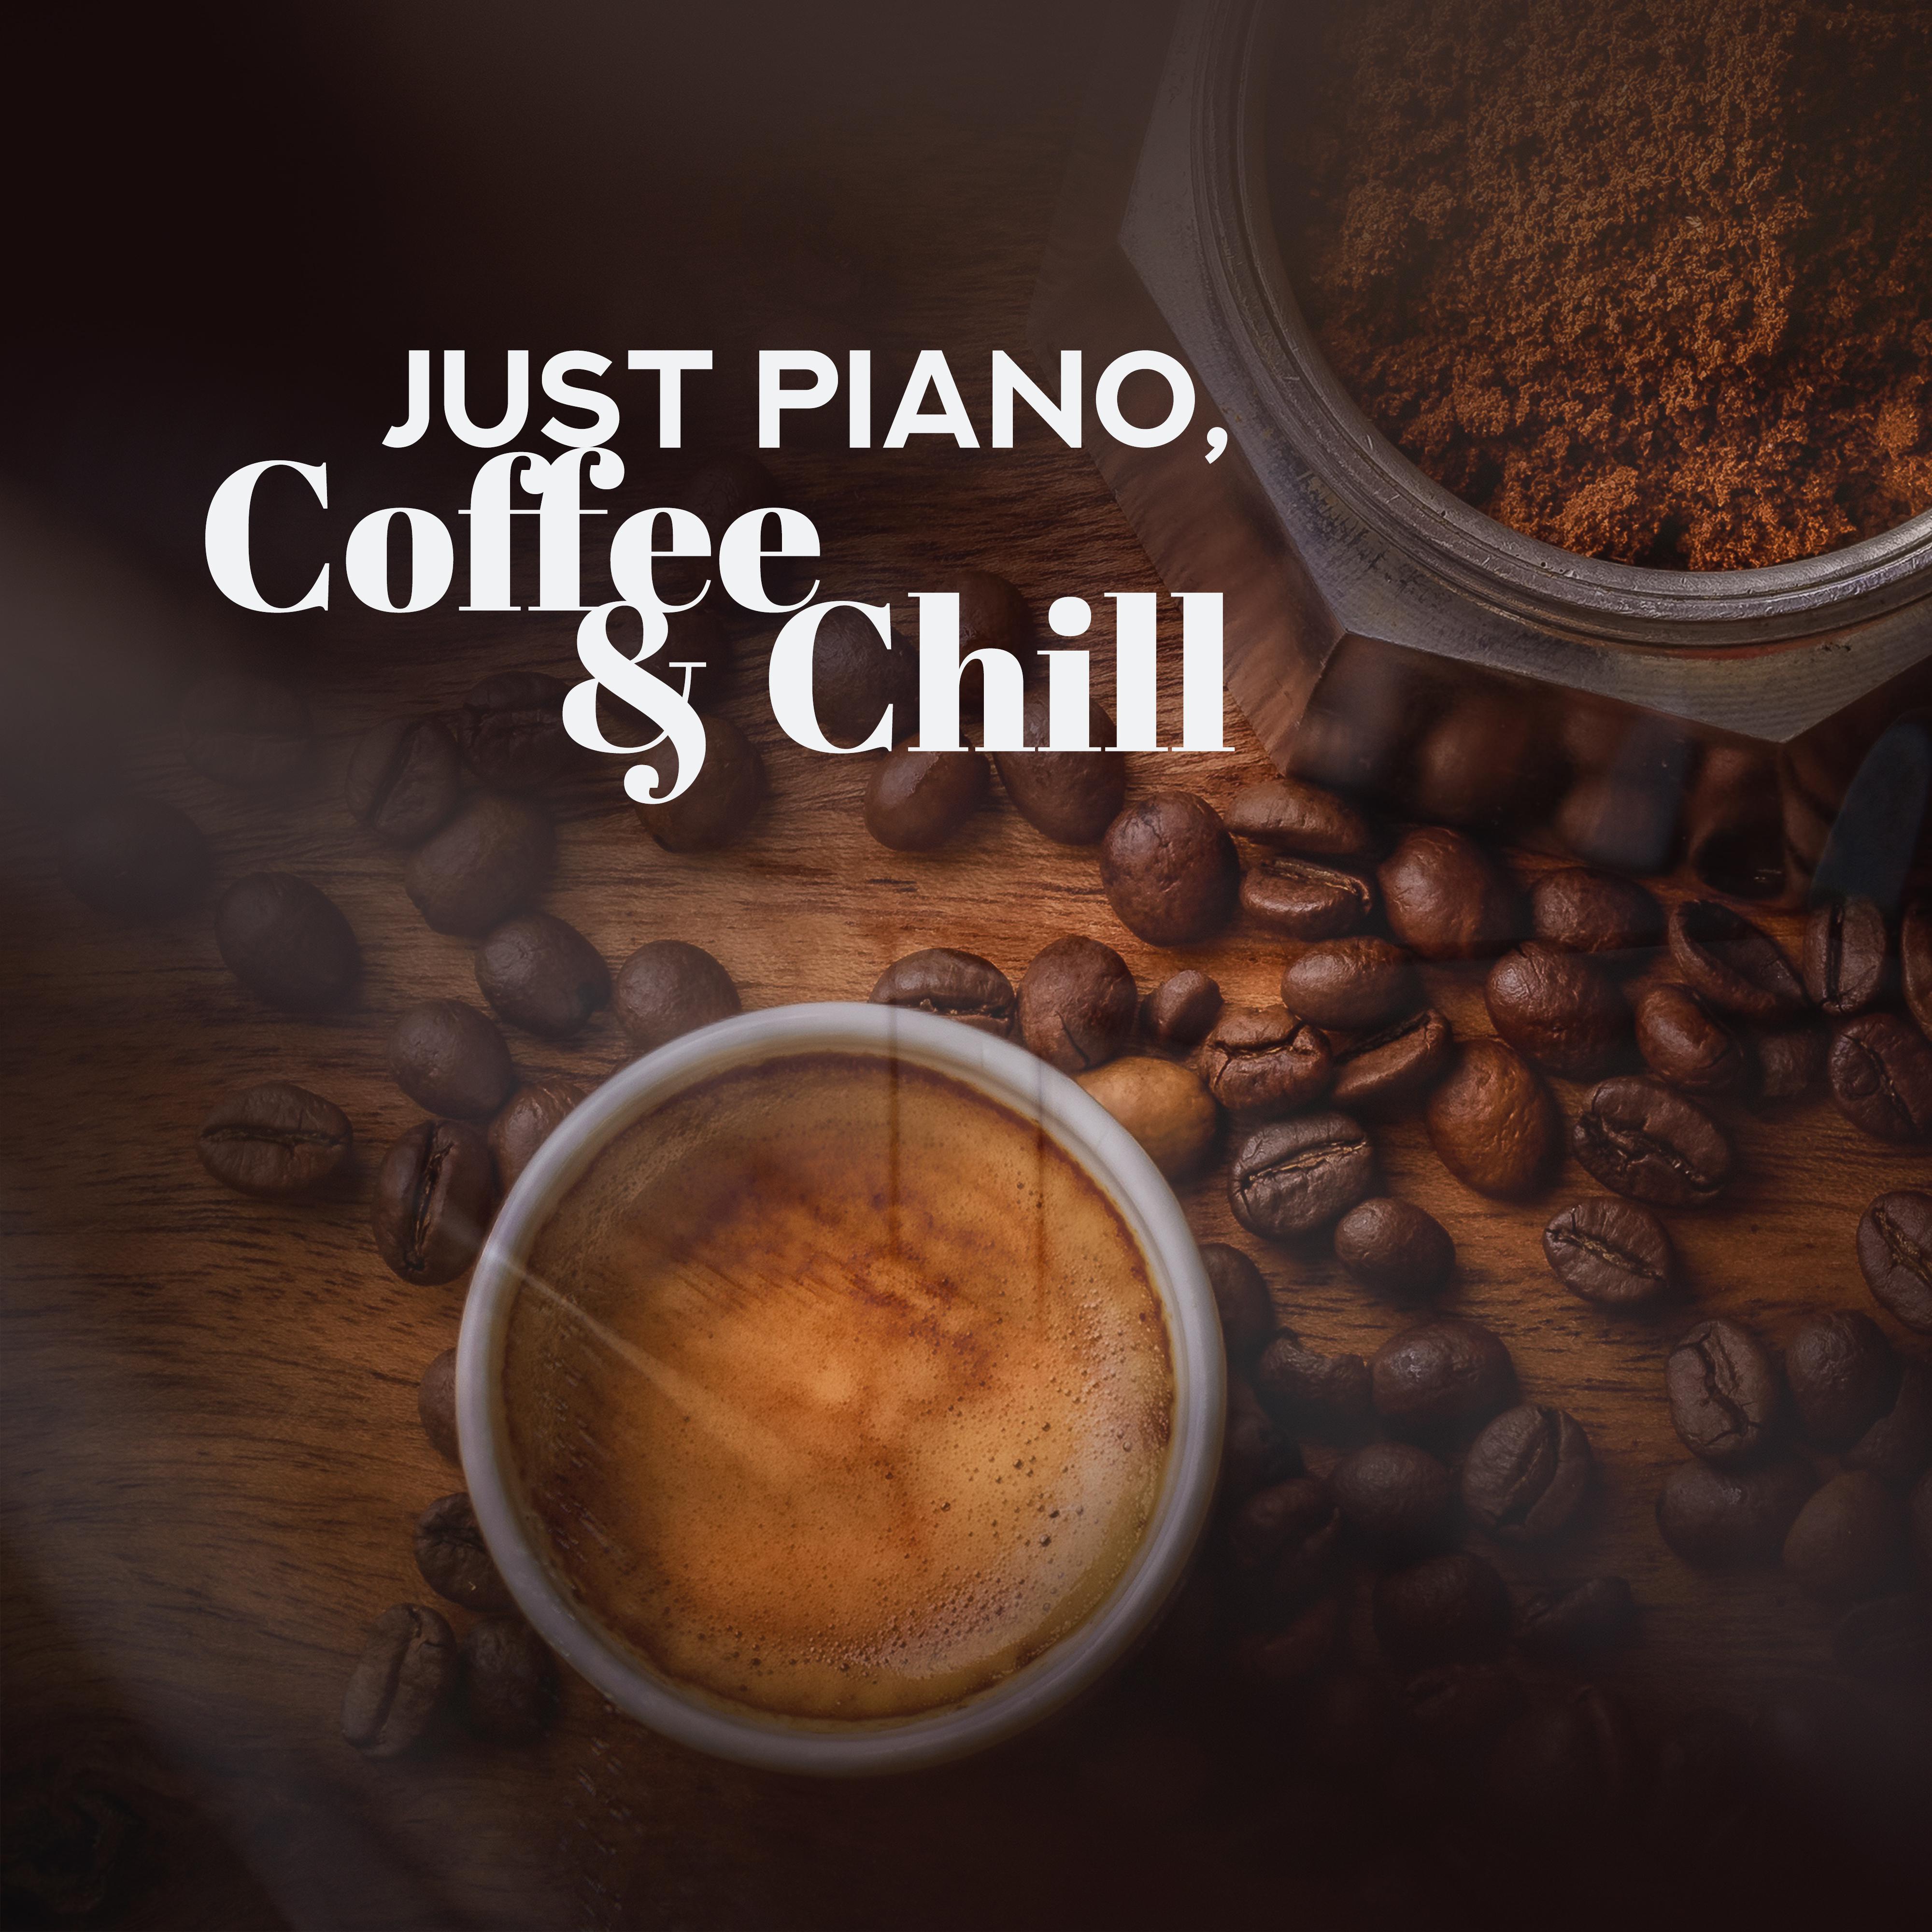 Just Piano, Coffee  Chill  2019 Best Relaxing Piano Jazz Compositions for Total Relax, Spend Some Lazy Time at Home with Good Coffee